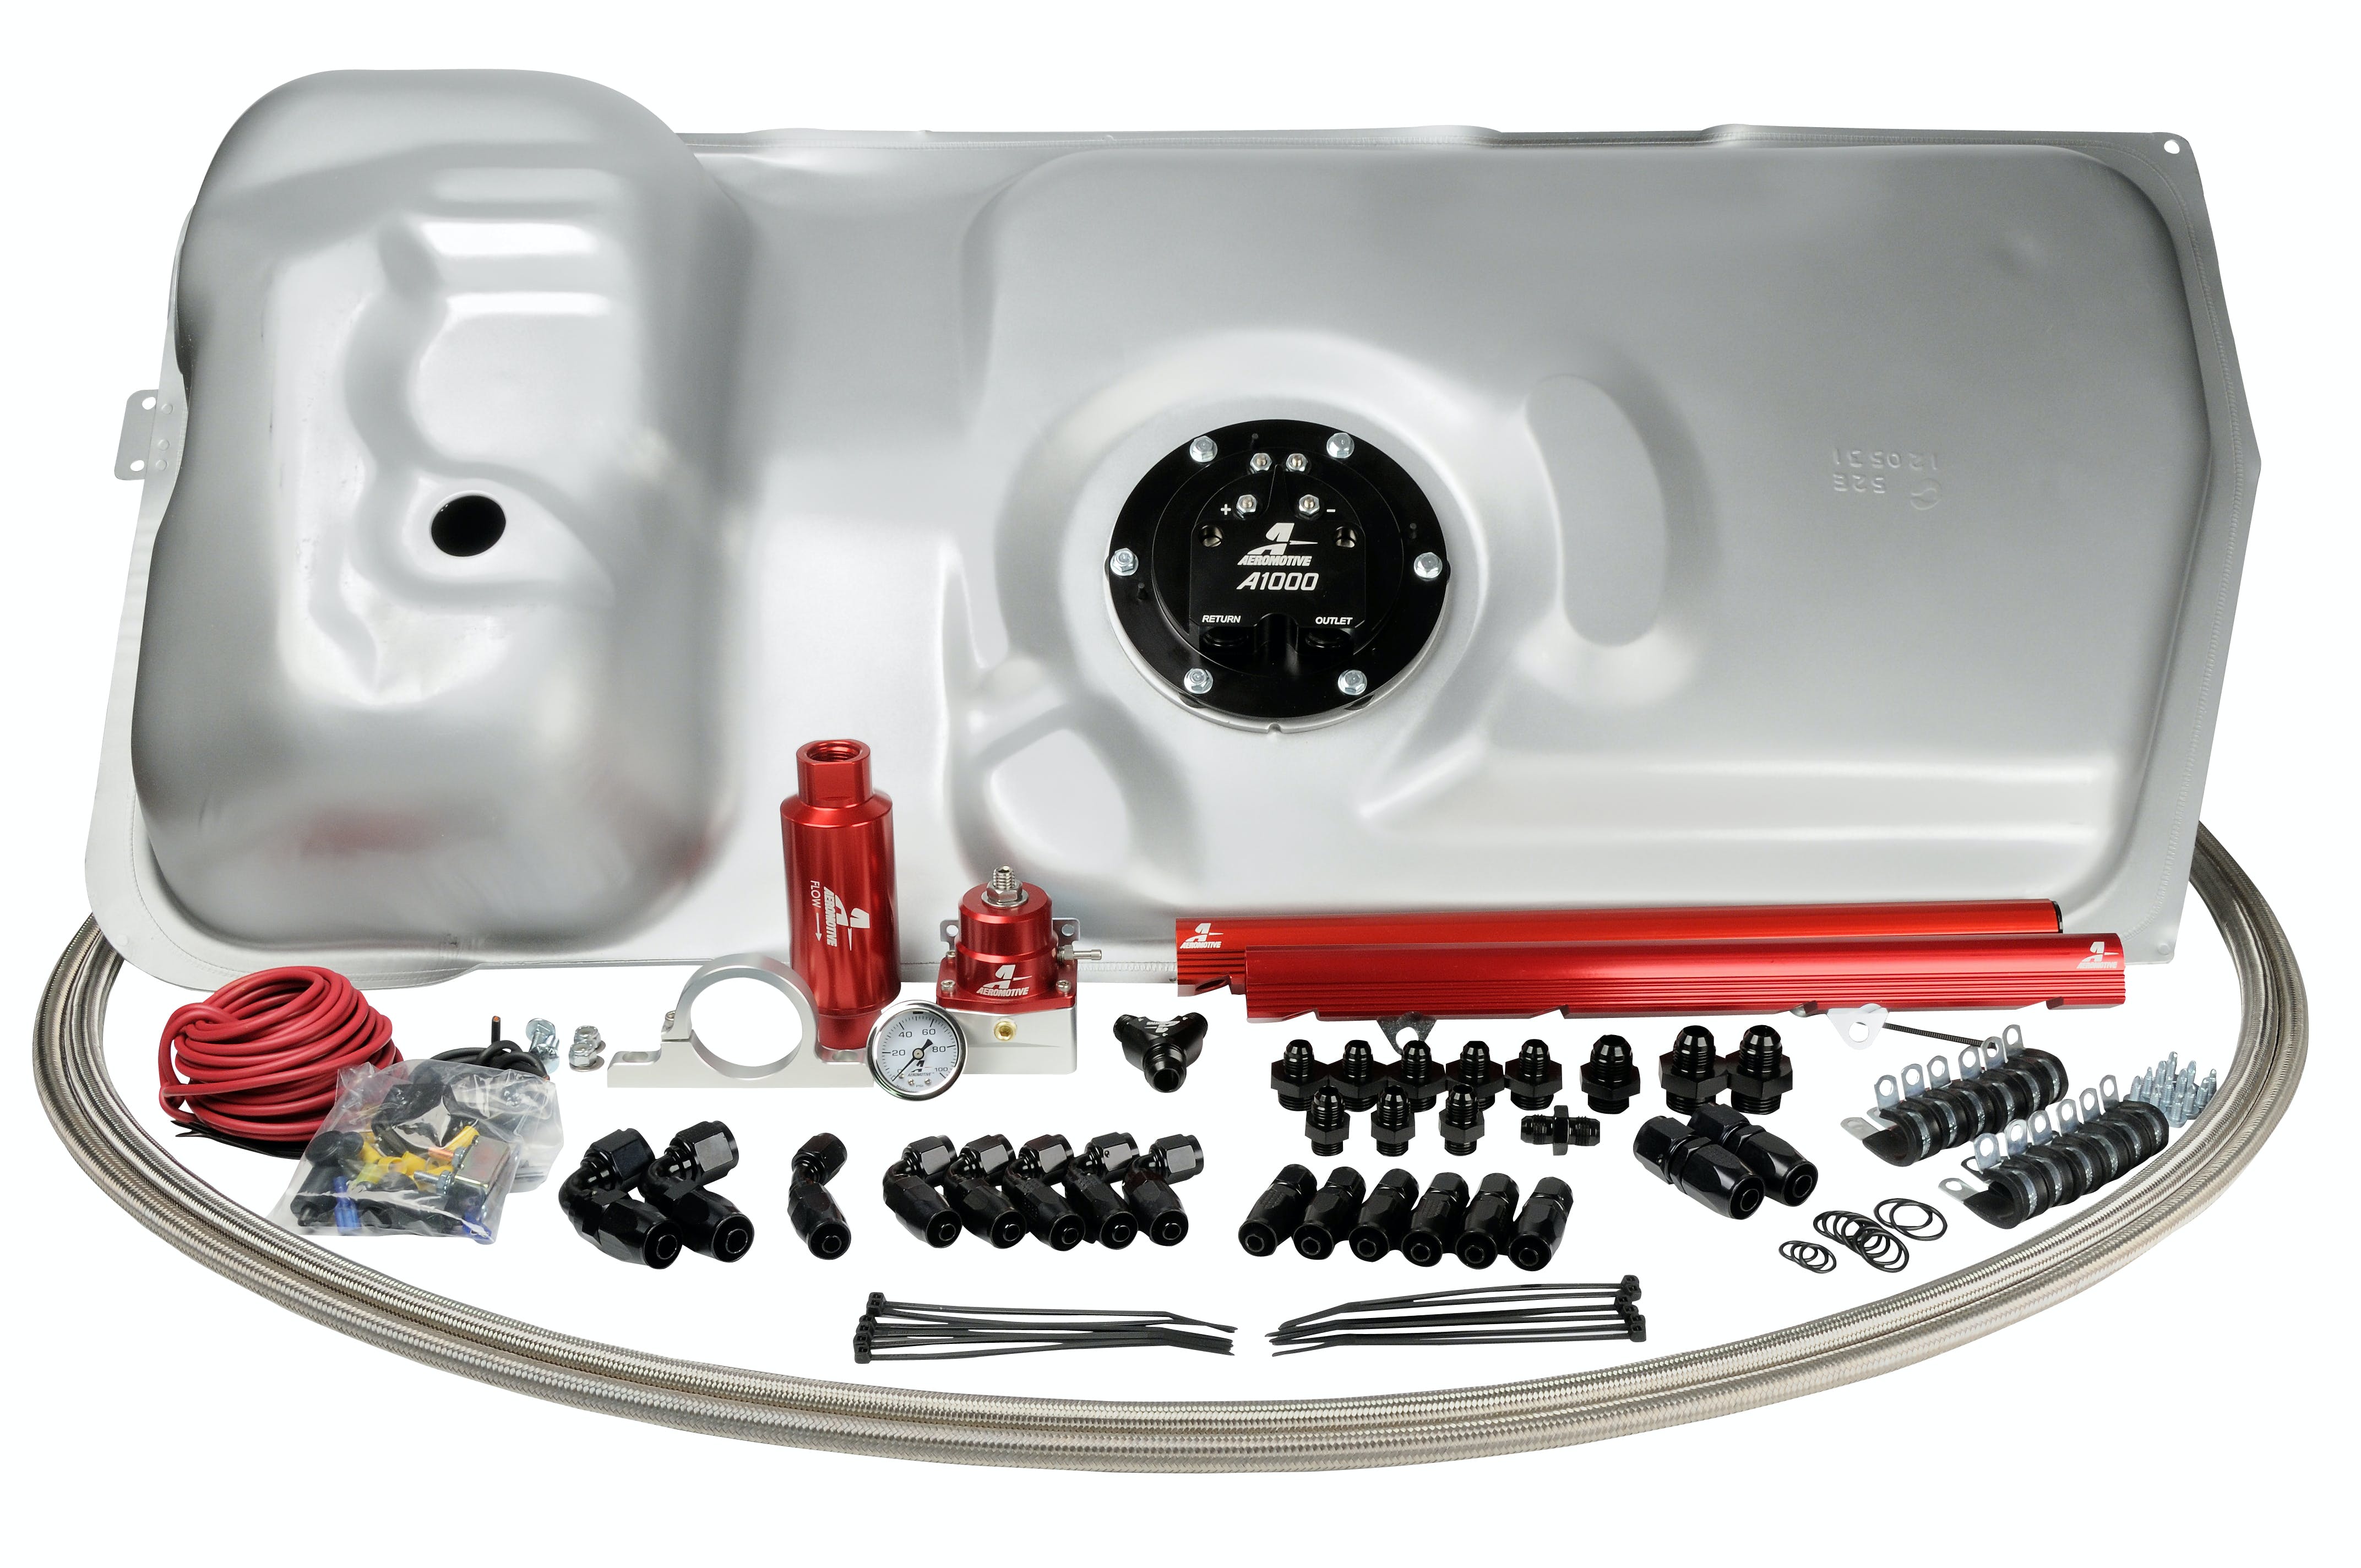 Aeromotive Fuel System 17130 A1000 System,86-95 Ford Mustang, 5.0L.(This item will supercede 17105; 17147)